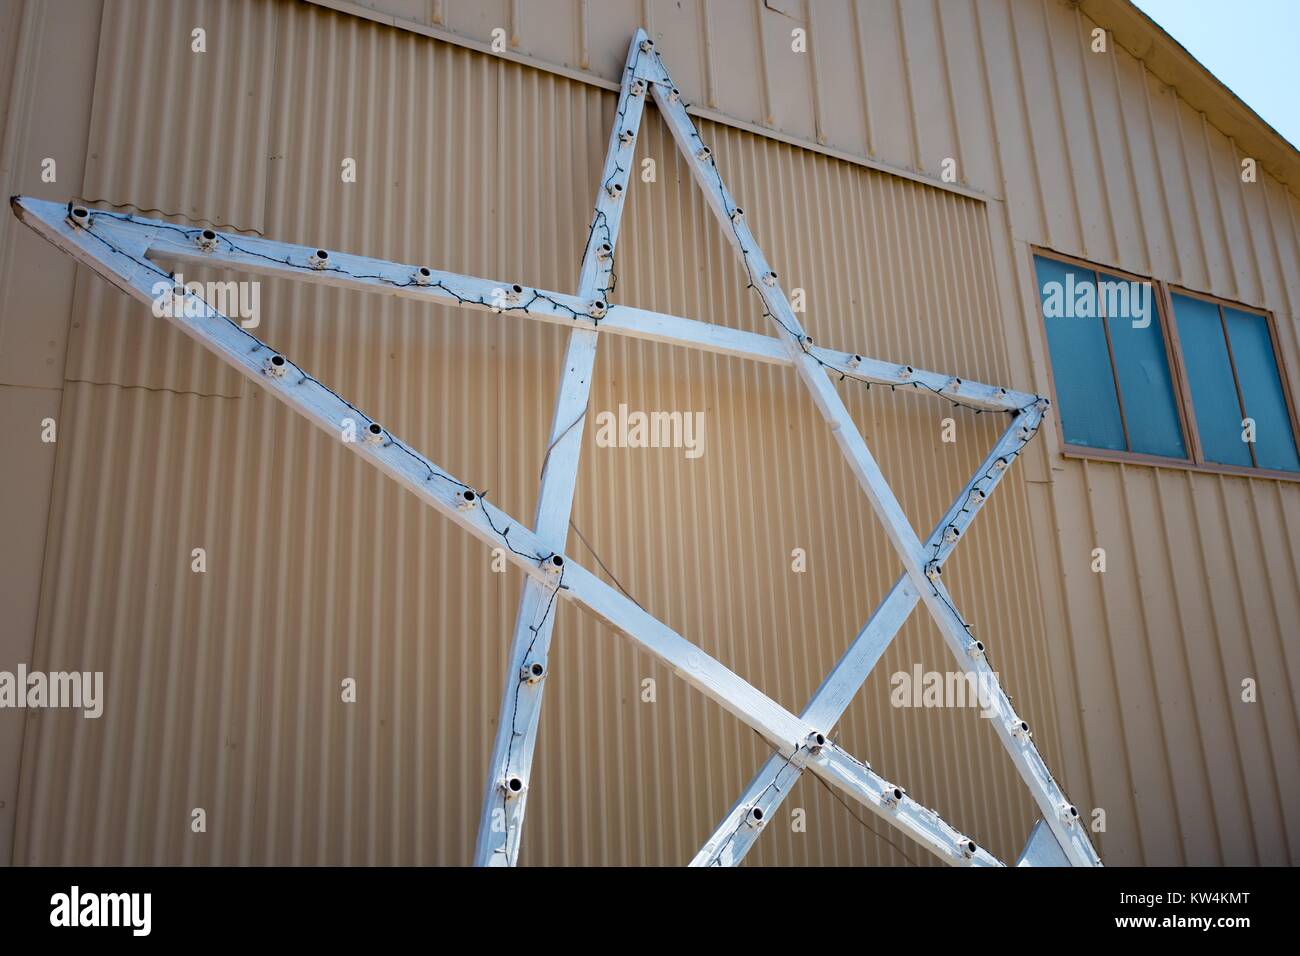 Iconic five-point lighted star from Hanger One rests against the site of the Moffett Field Historical Museum within the secure area of the NASA Ames Research Center campus in the Silicon Valley town of Palo Alto, California, August 25, 2016. Hangar One, which is among the world's largest free-standing structures, was leased to Google Inc affiliate Planetary Ventures in 2016 (along with Moffett Field) for 60 years at a cost of $1.6 billion, contingent on the company refurbishing the structure, California. Stock Photo